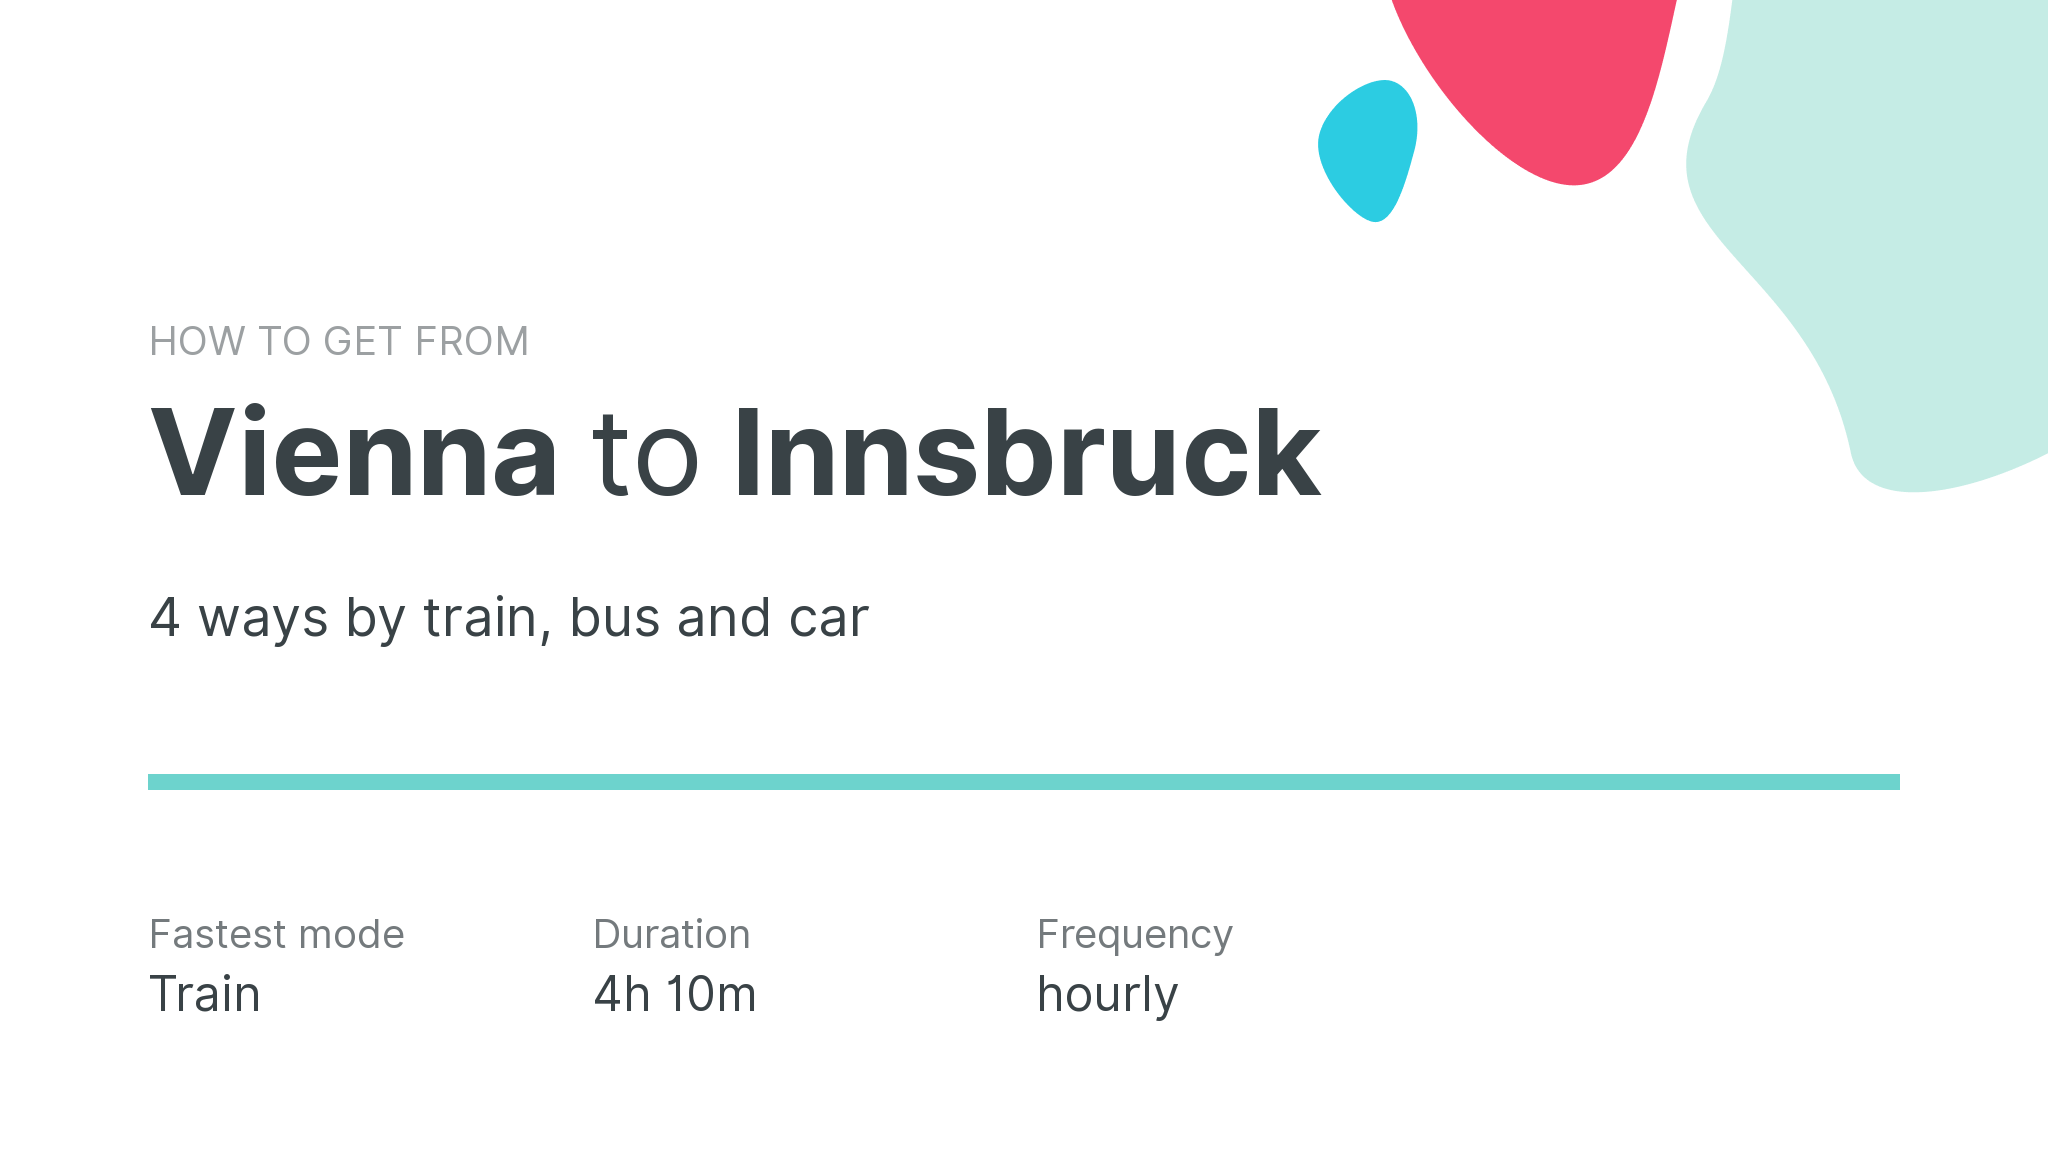 How do I get from Vienna to Innsbruck